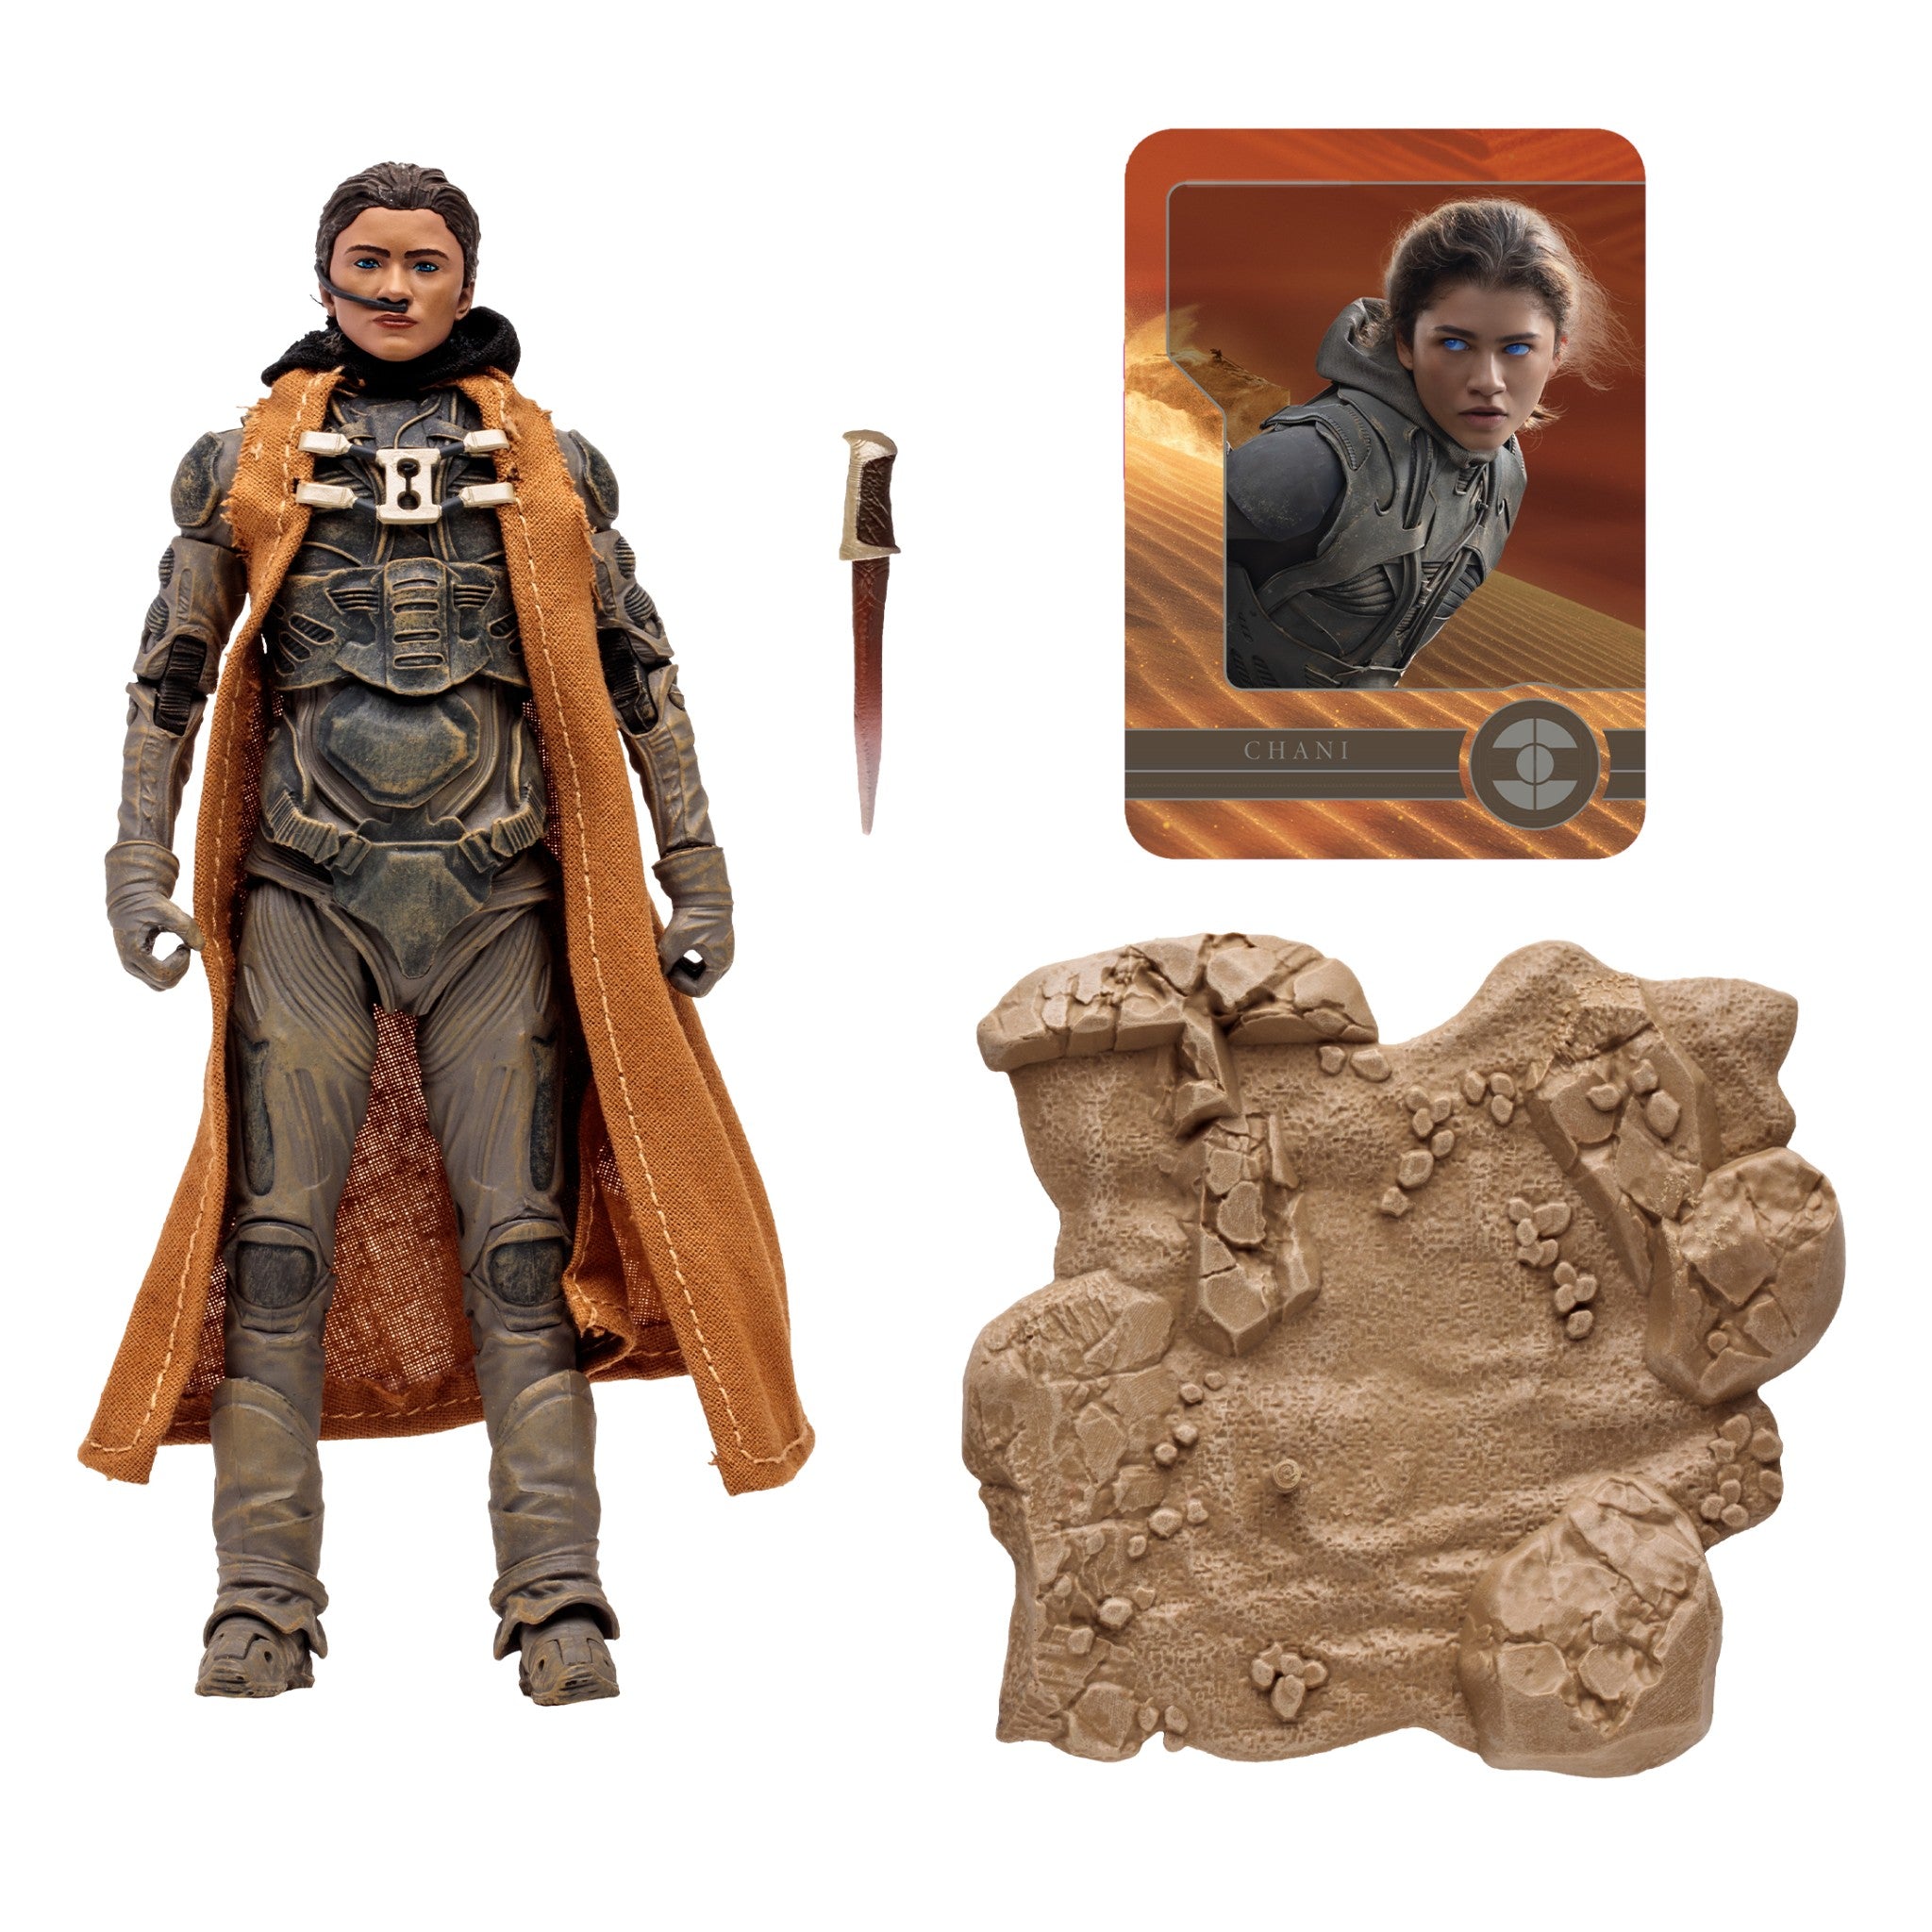 Dune Movie Part Two 2 Chani 7" Action Figure - McFarlane Toys